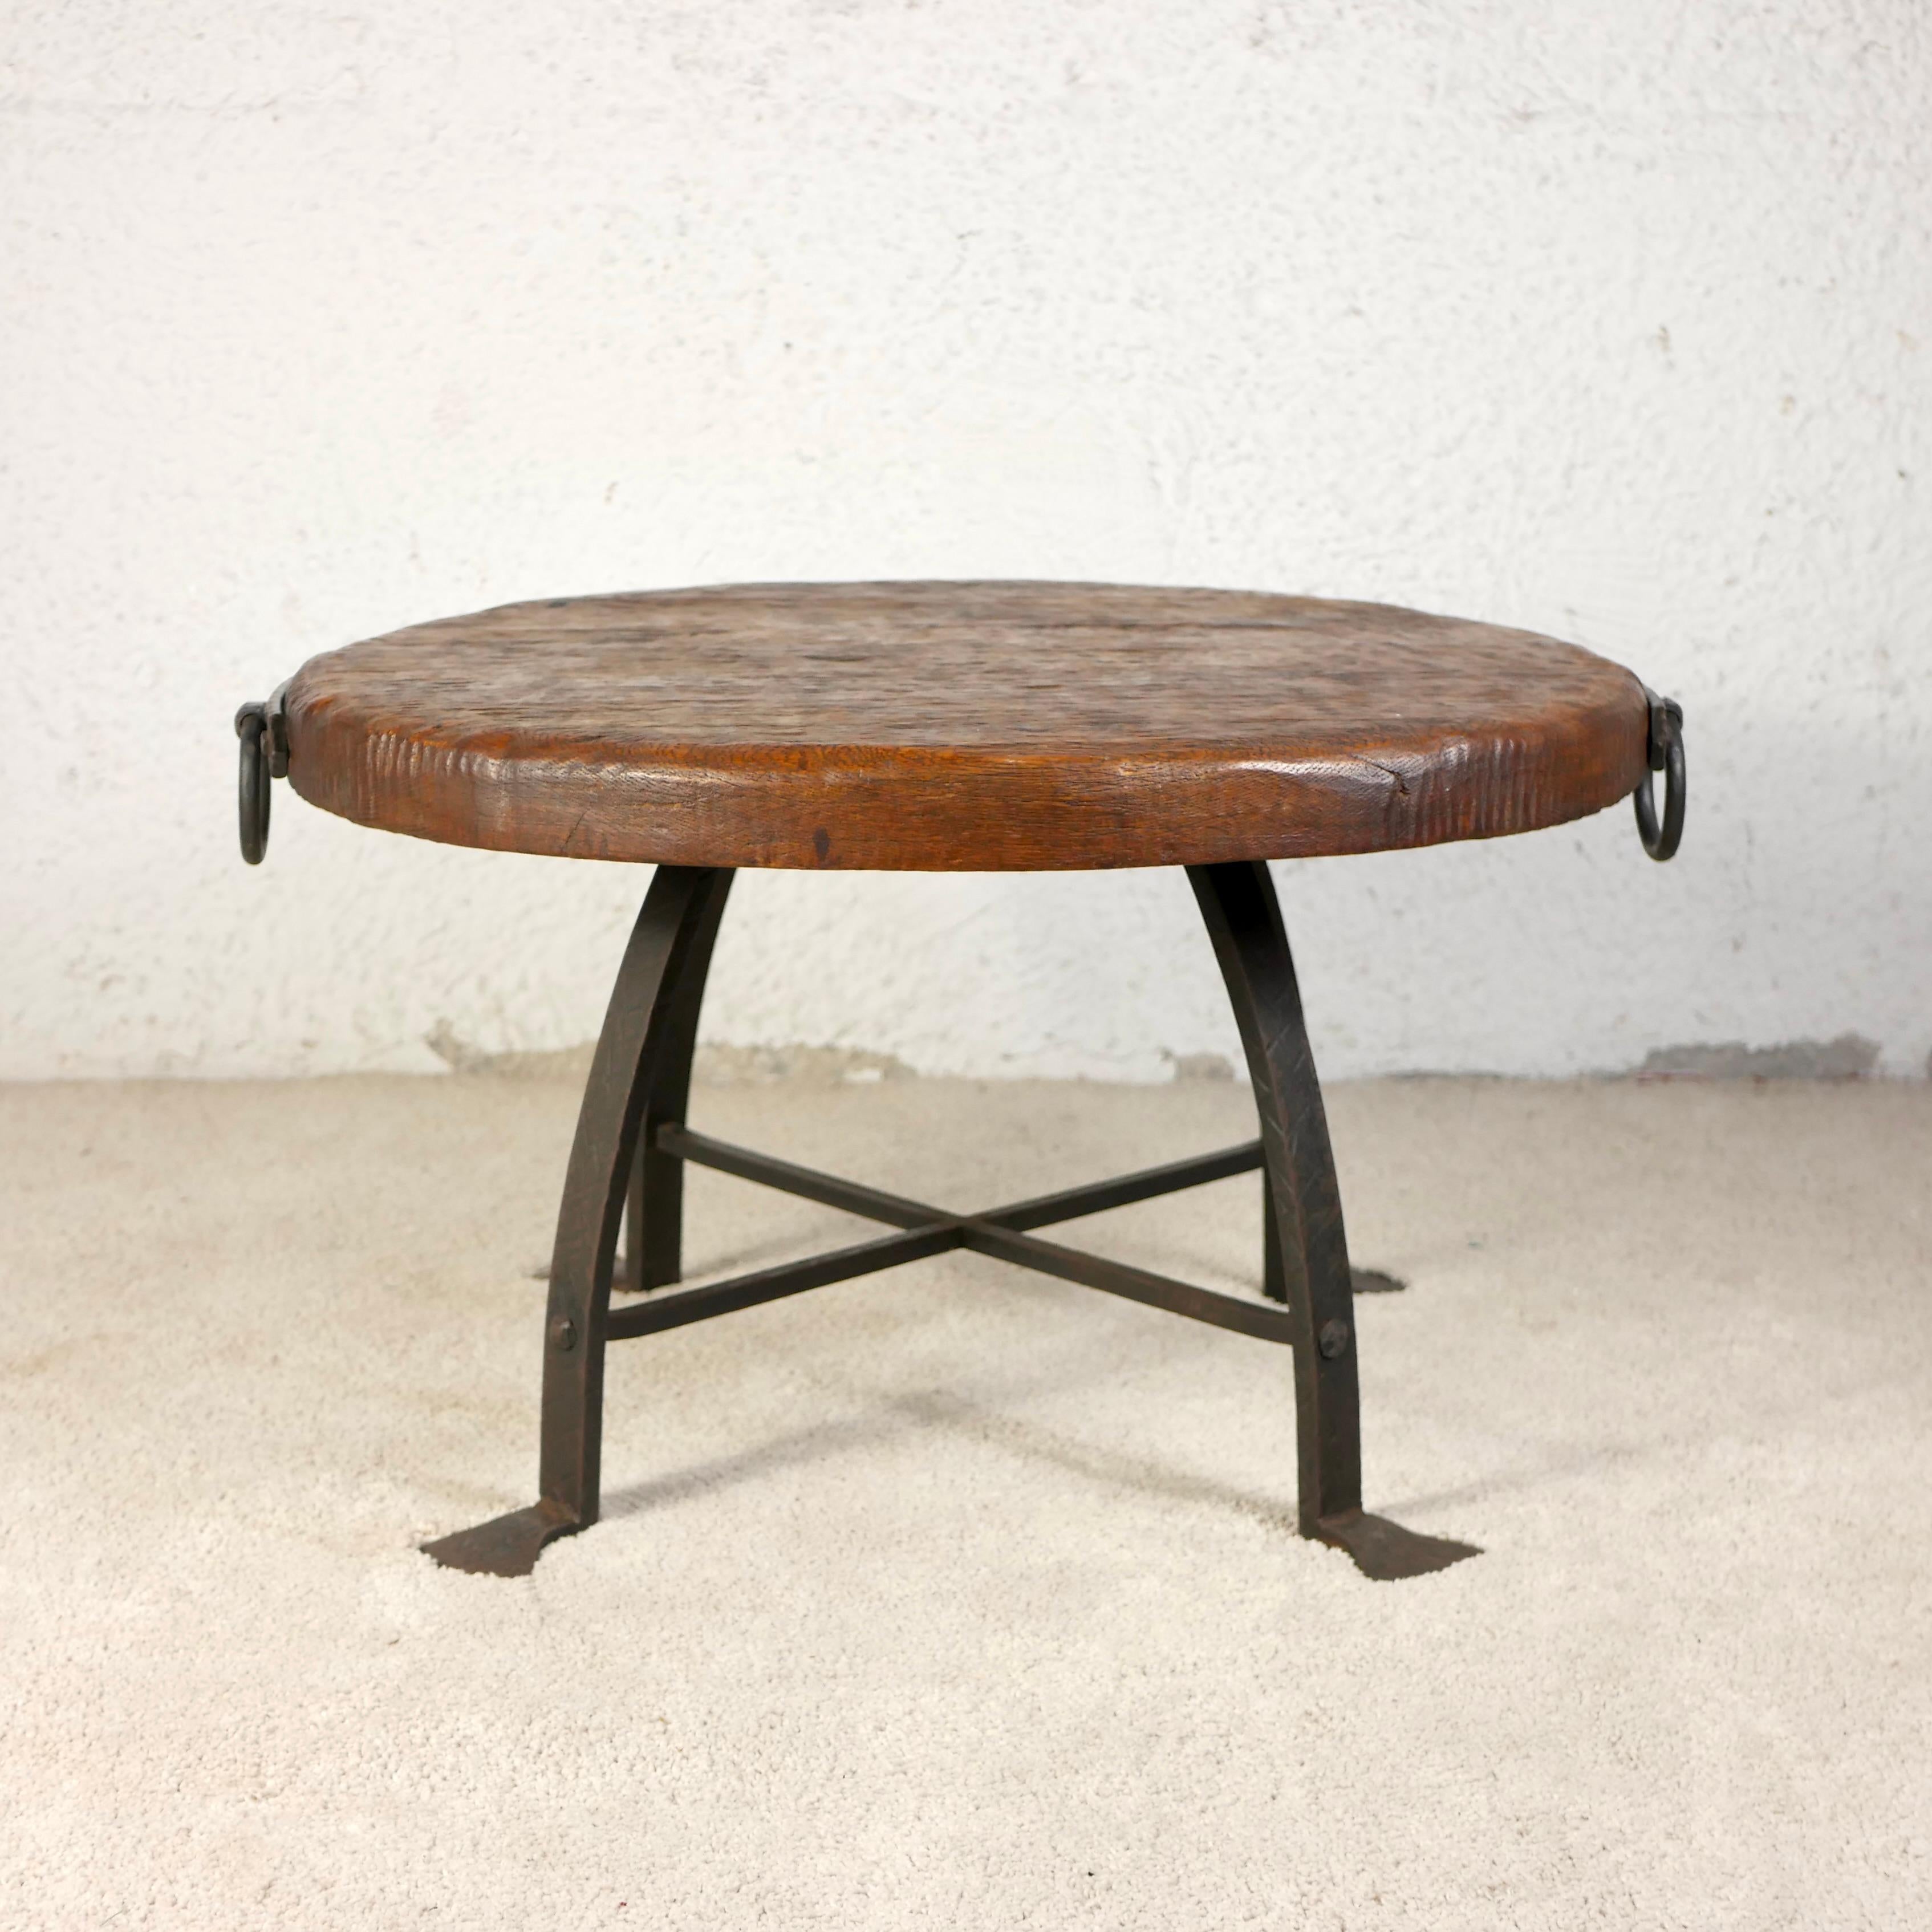 Belgian Brutalist round coffee table, wrought iron and solid oak, Belgium, 1950s For Sale